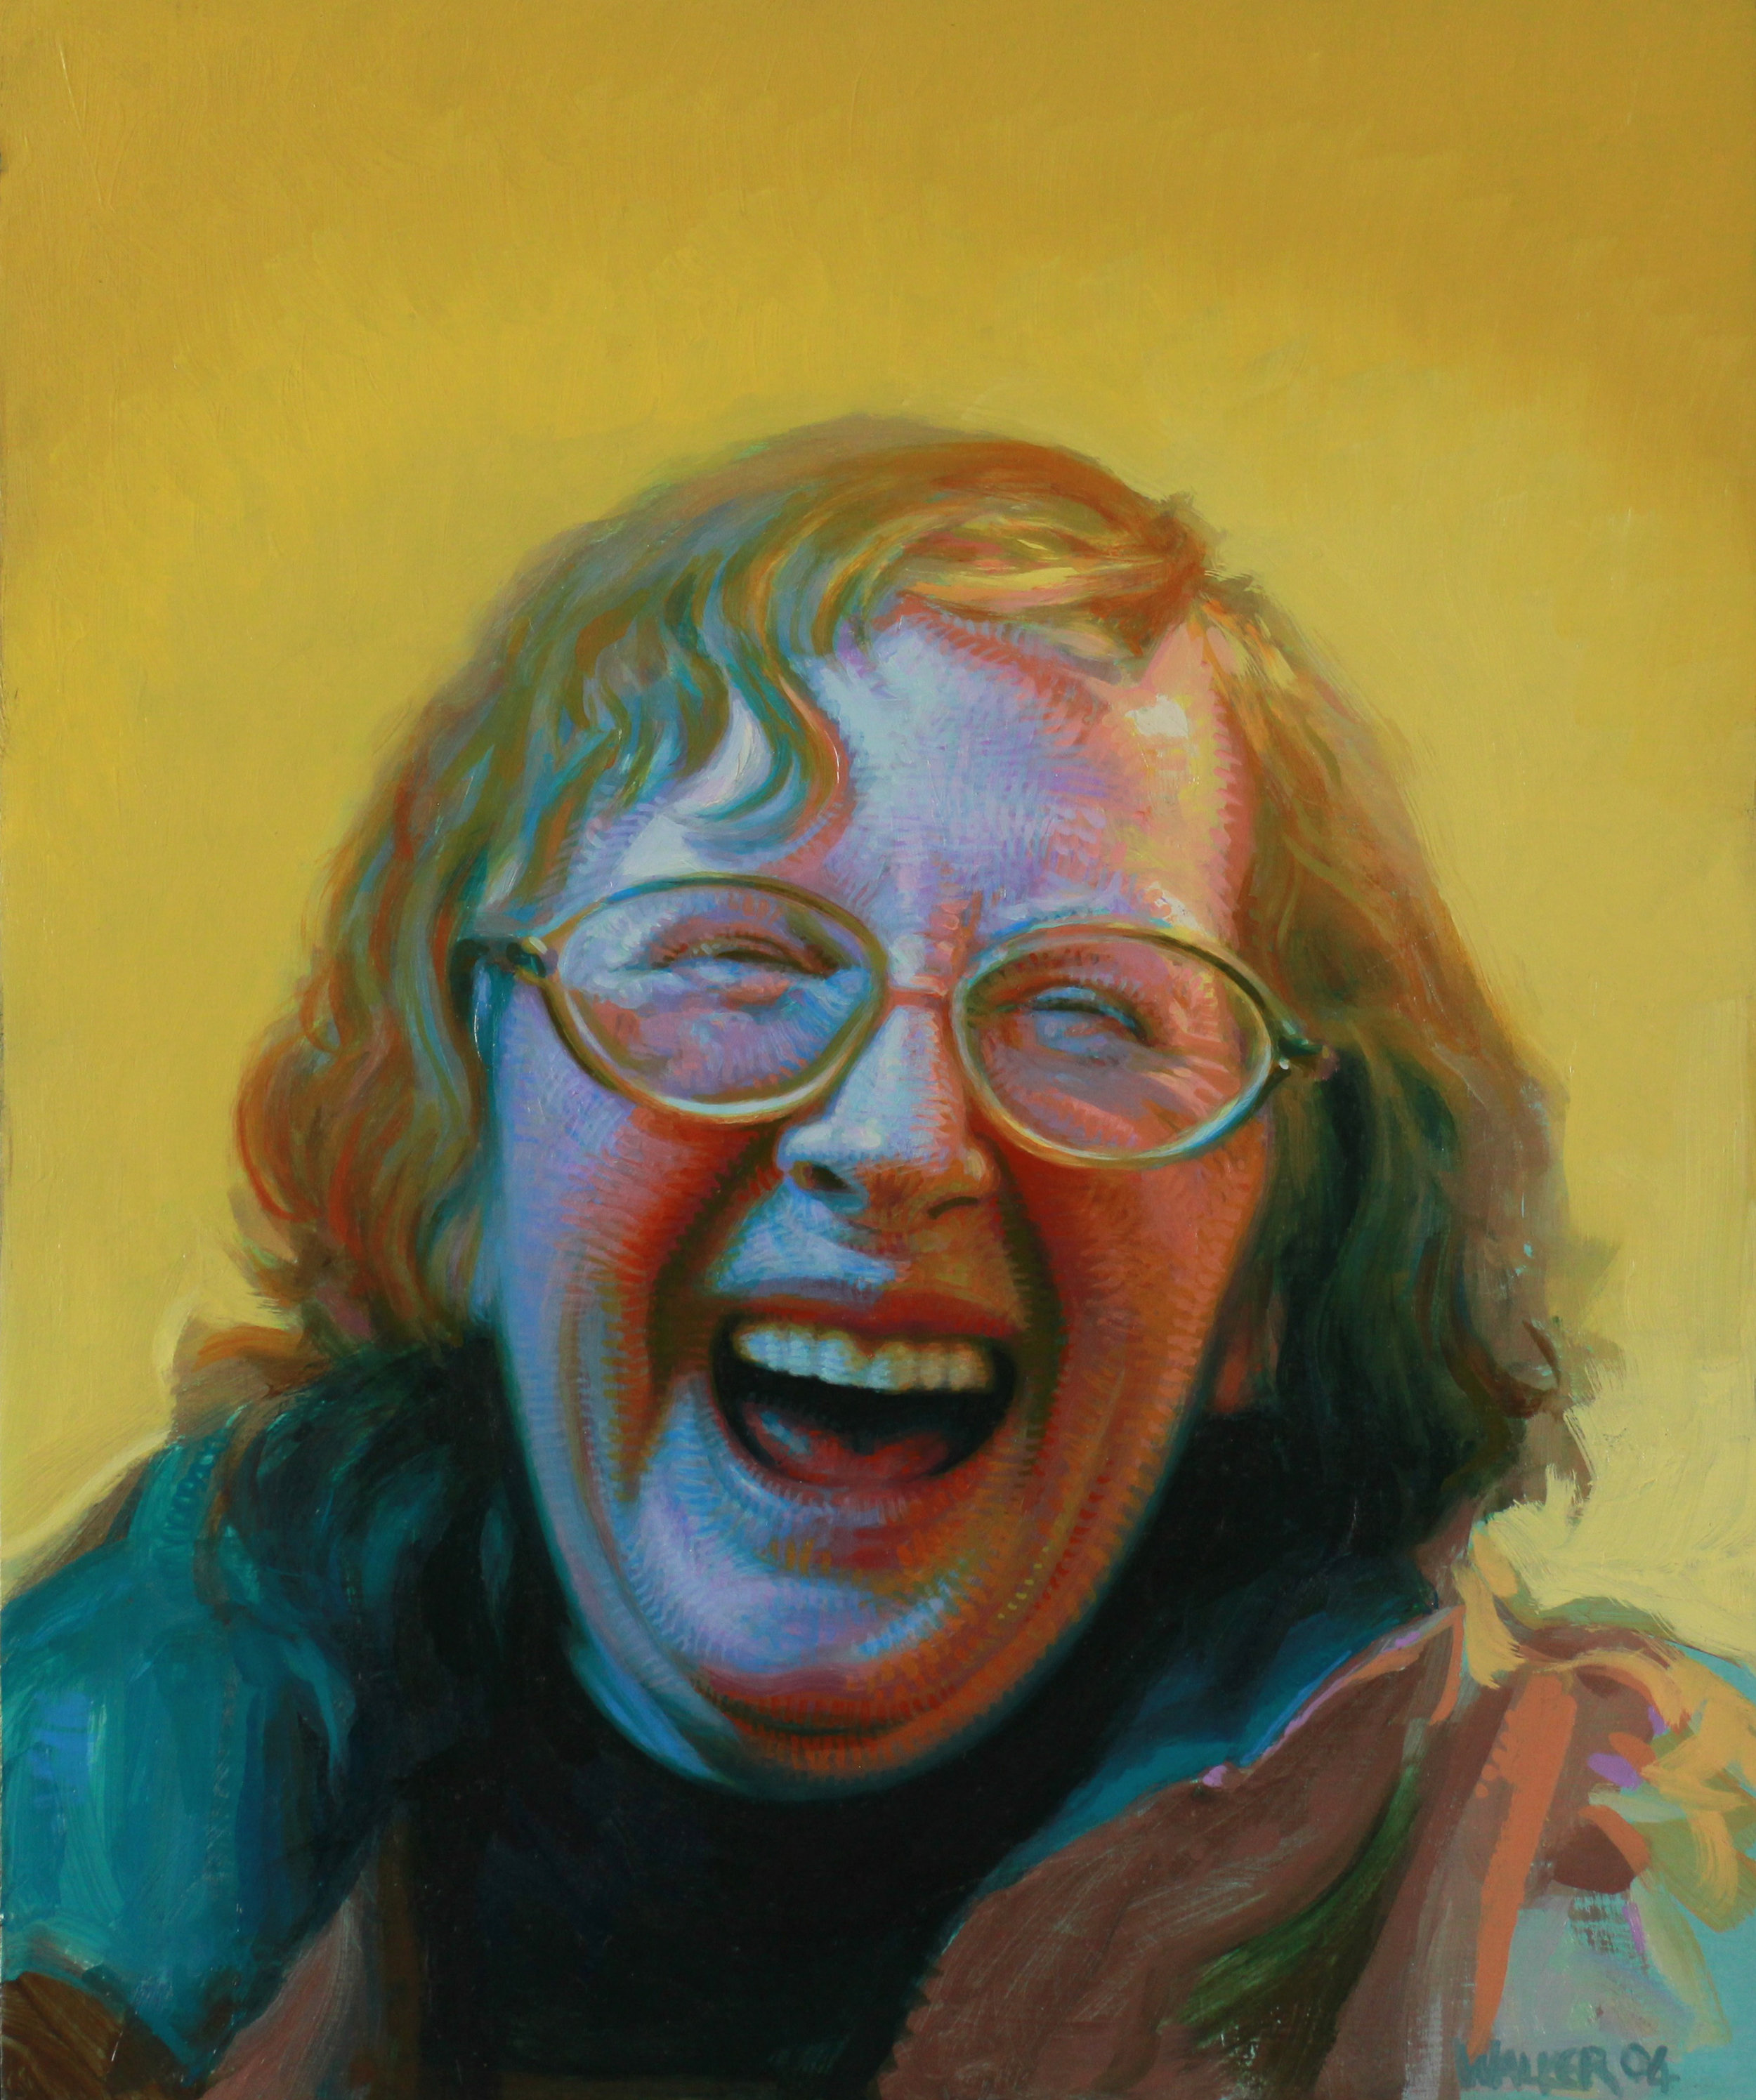  Laughing Woman. Oil on panel. 